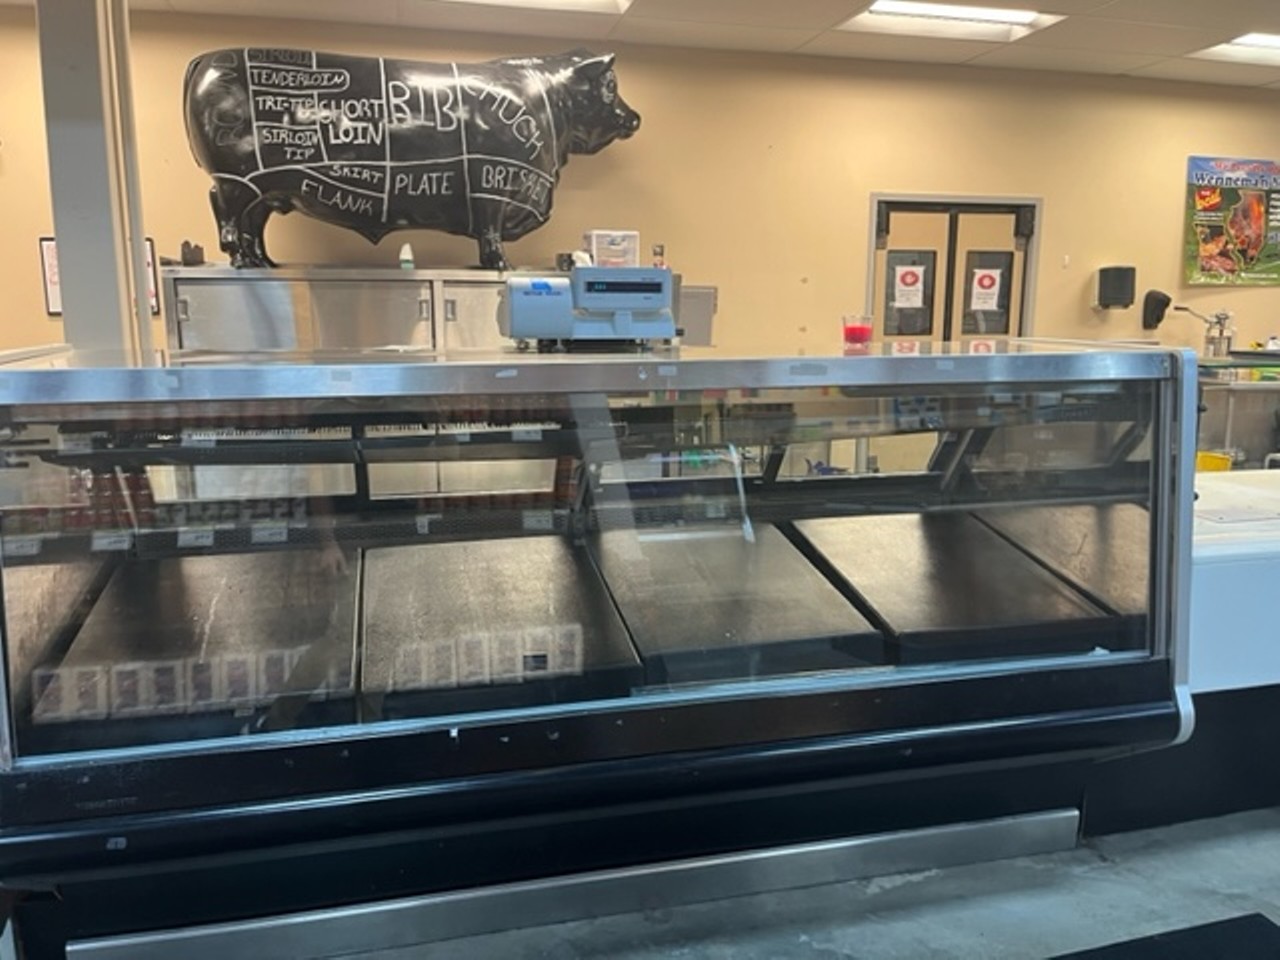 The meat counter on Lafayette Avenue was totally empty.